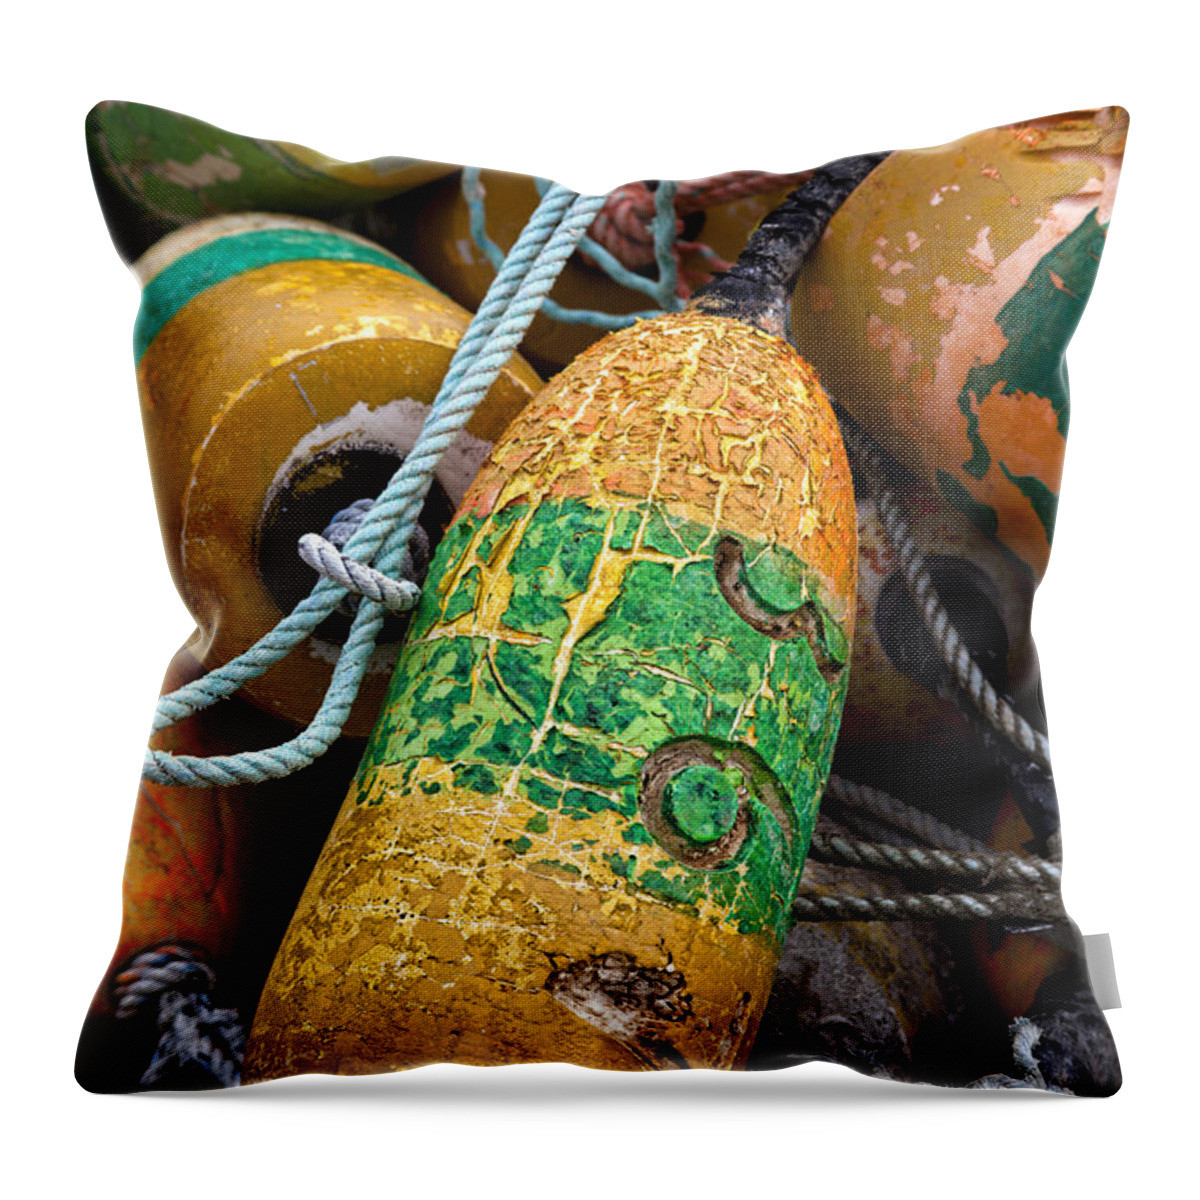 Newport Throw Pillow featuring the photograph Pile of Colorful Buoys by Carol Leigh